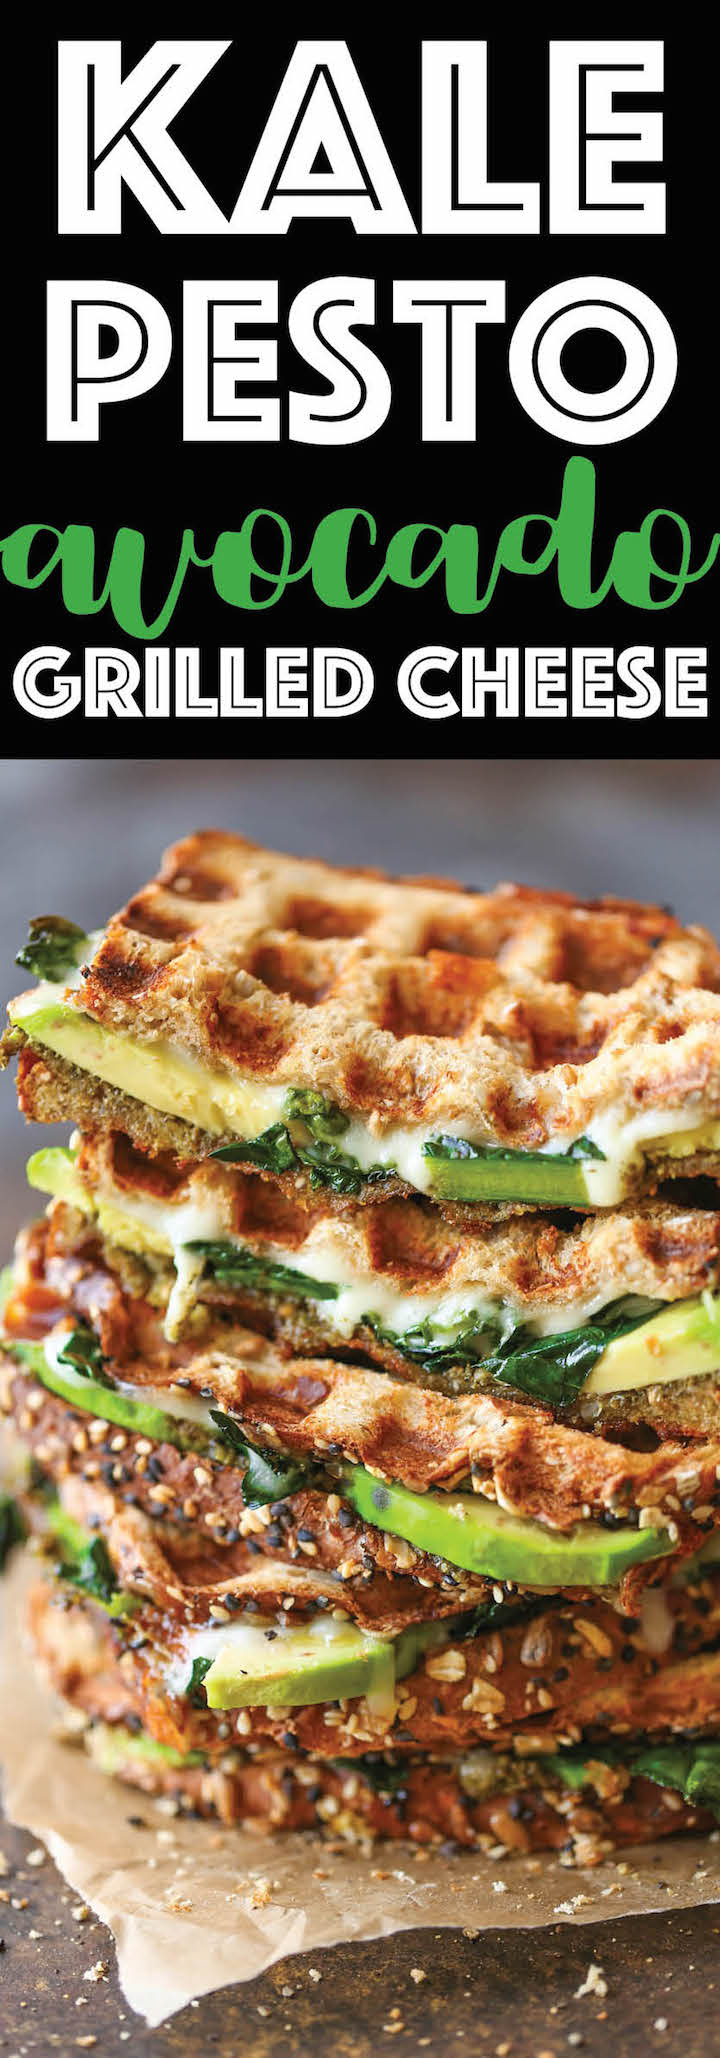 Kale Pesto Avocado Grilled Cheese - Hearty, cheesy, nutritious and filled with plenty of greens! Can be served for lunch or dinner for the entire family!